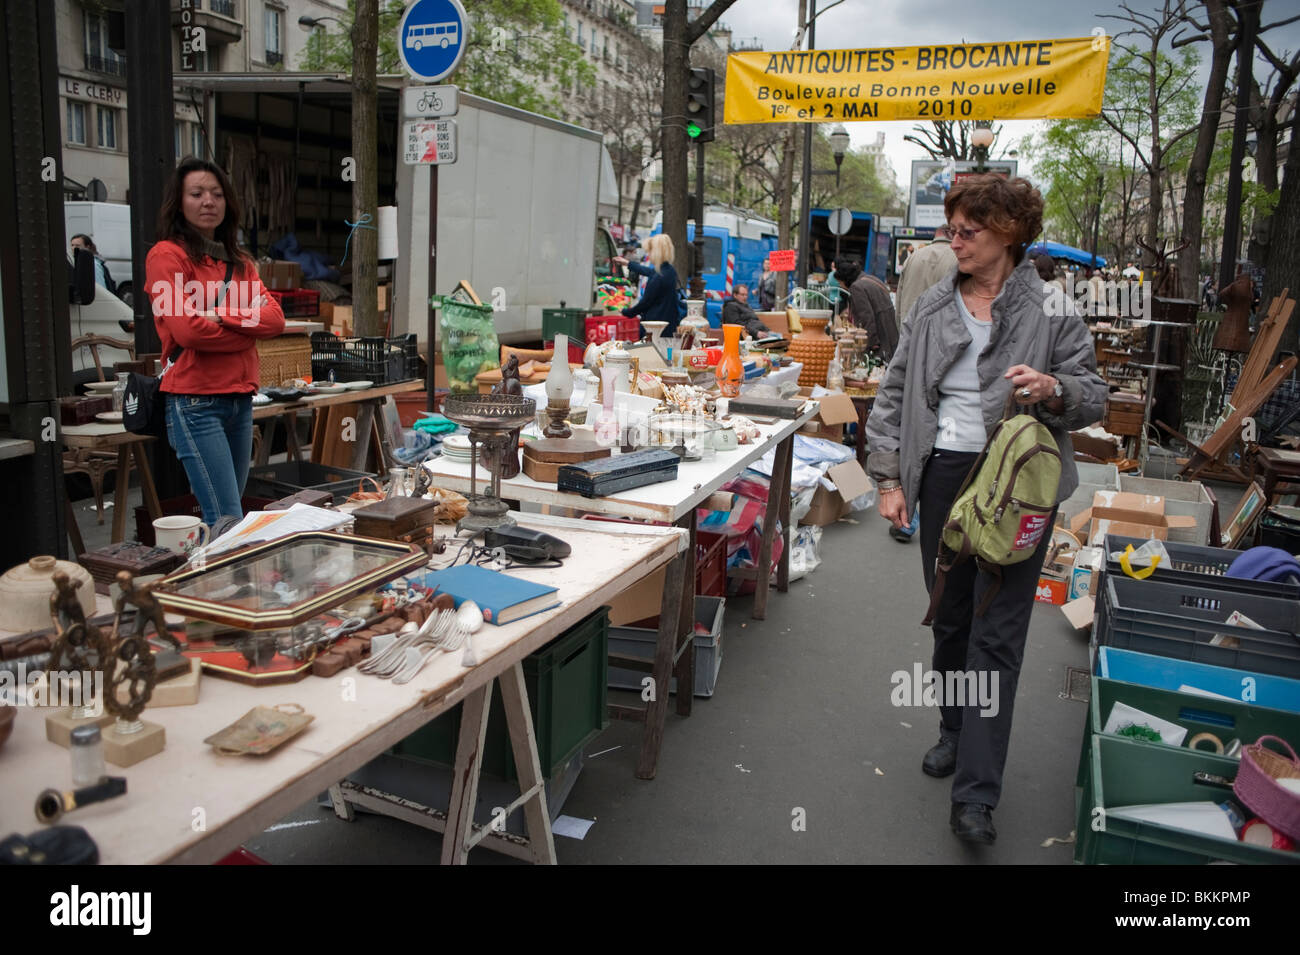 People Shopping For Second Hand Household Objects On Street Garage Sale Stalls Paris France Stock Photo Alamy